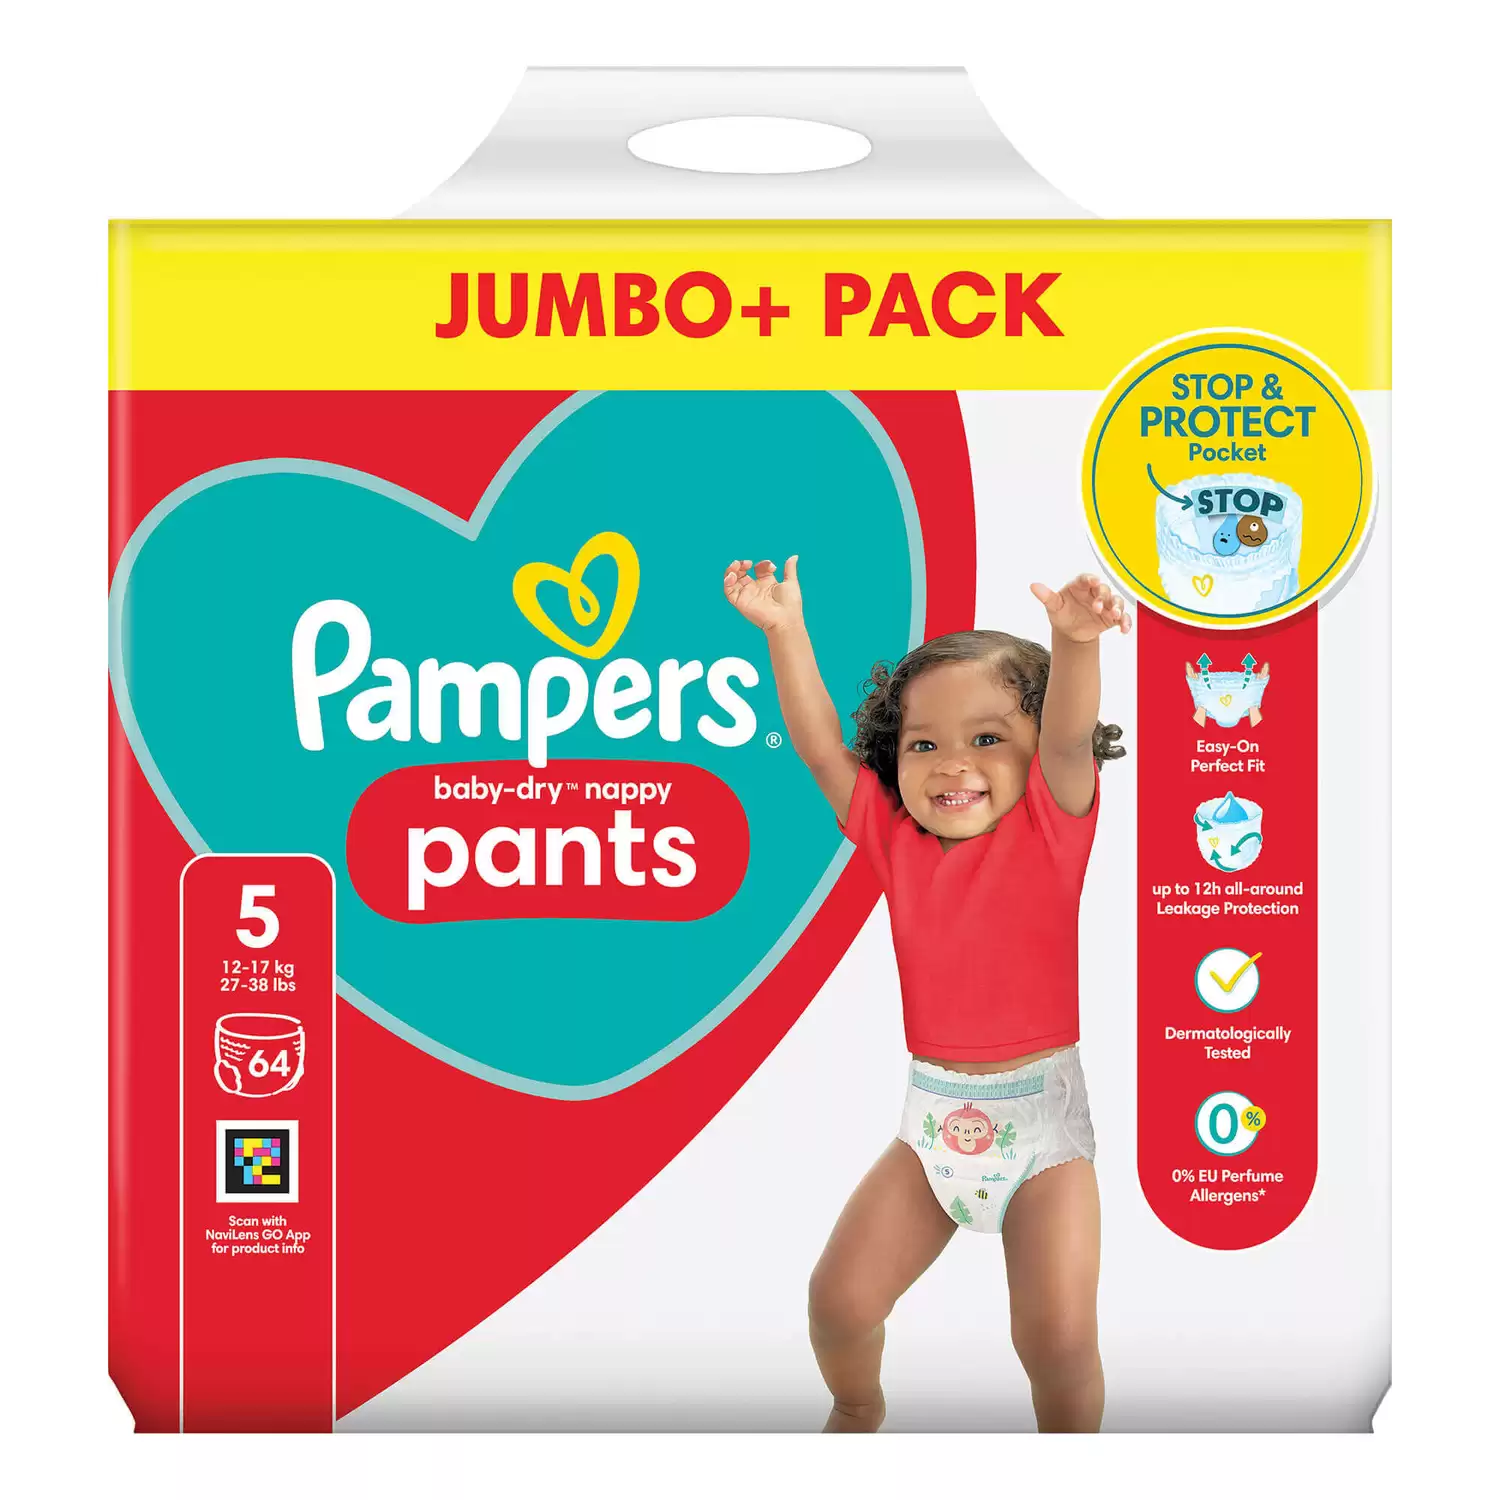 Pampers Baby Dry Nappy Pants Size 5 64 Pack - Gompels - Care & Nursery  Supply Specialists